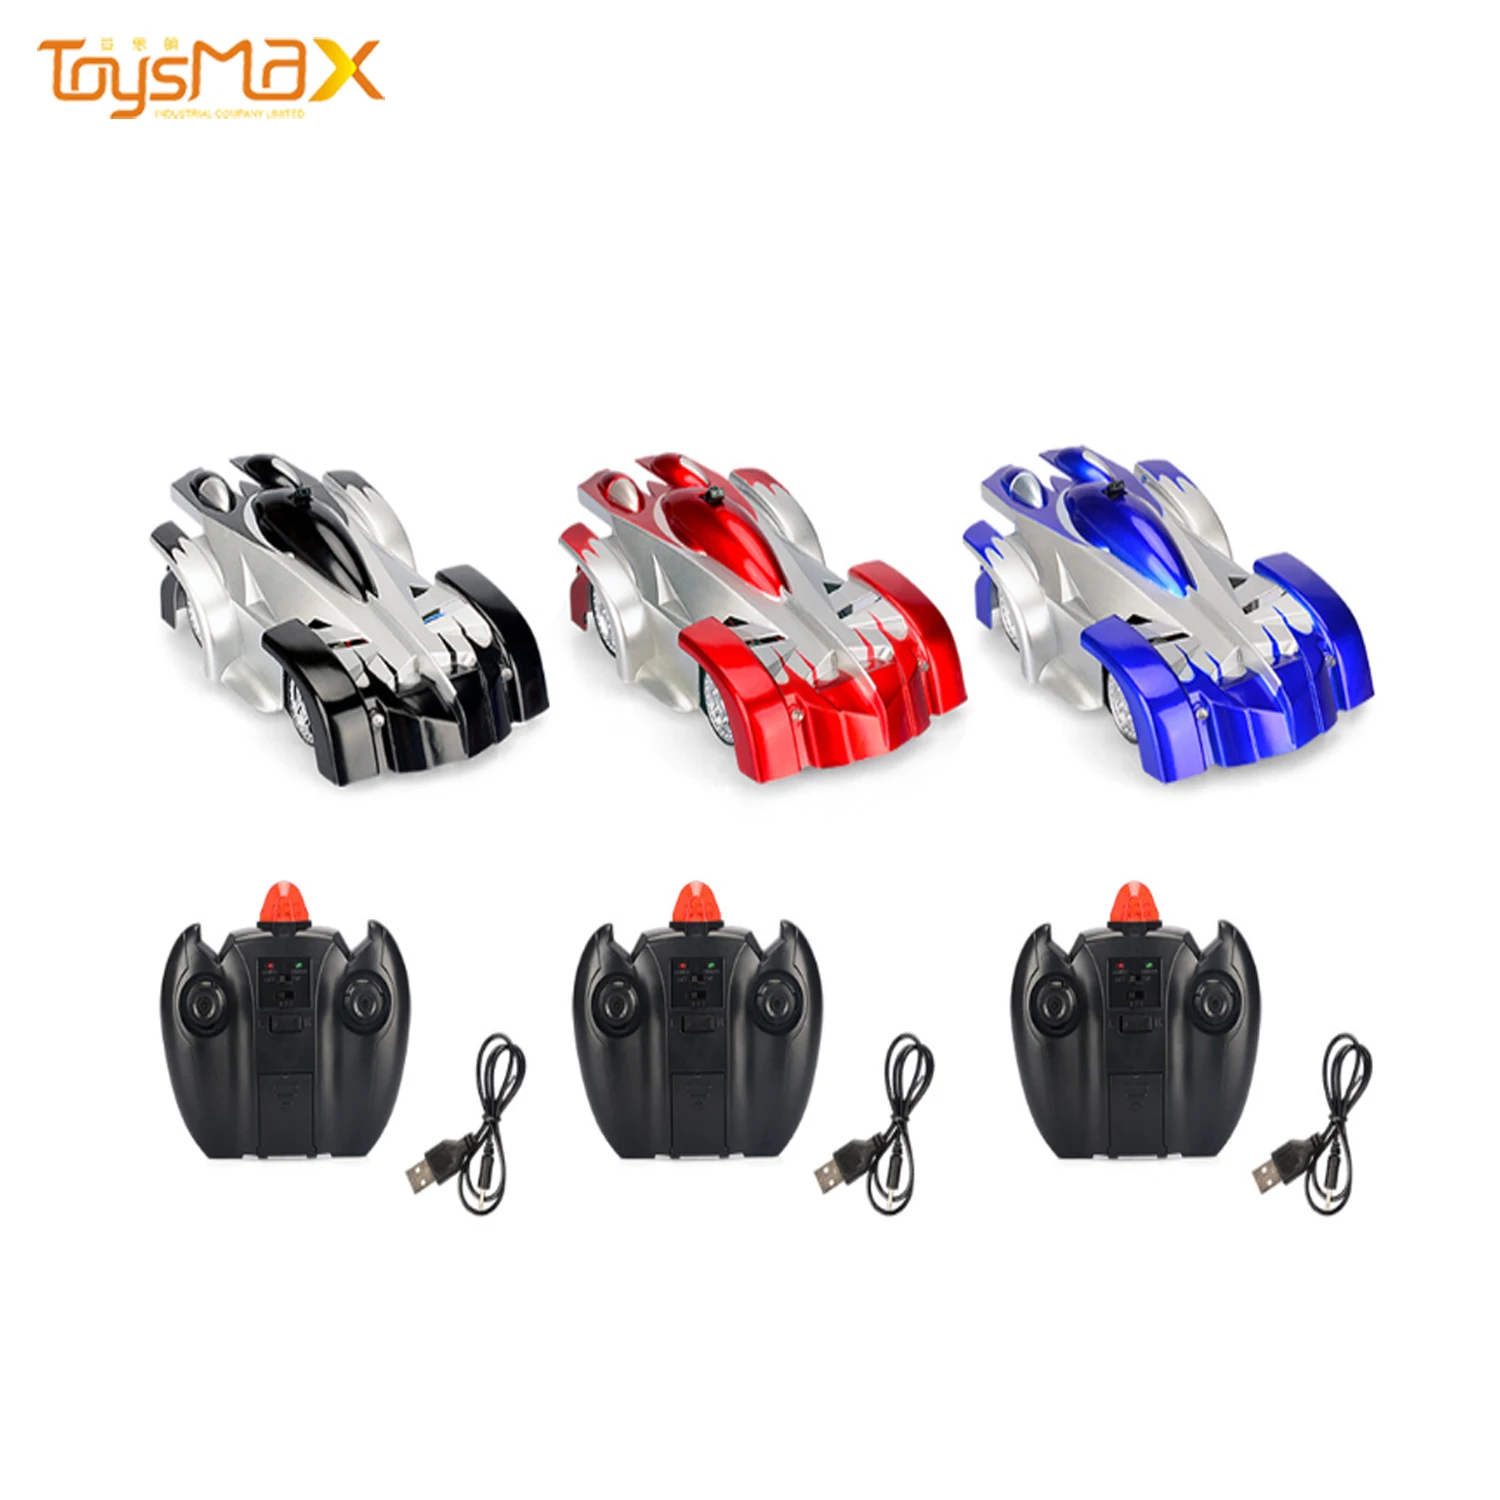 Led Light Stunt Toys  Rc Remote Control Wall Climbing Car For Sales